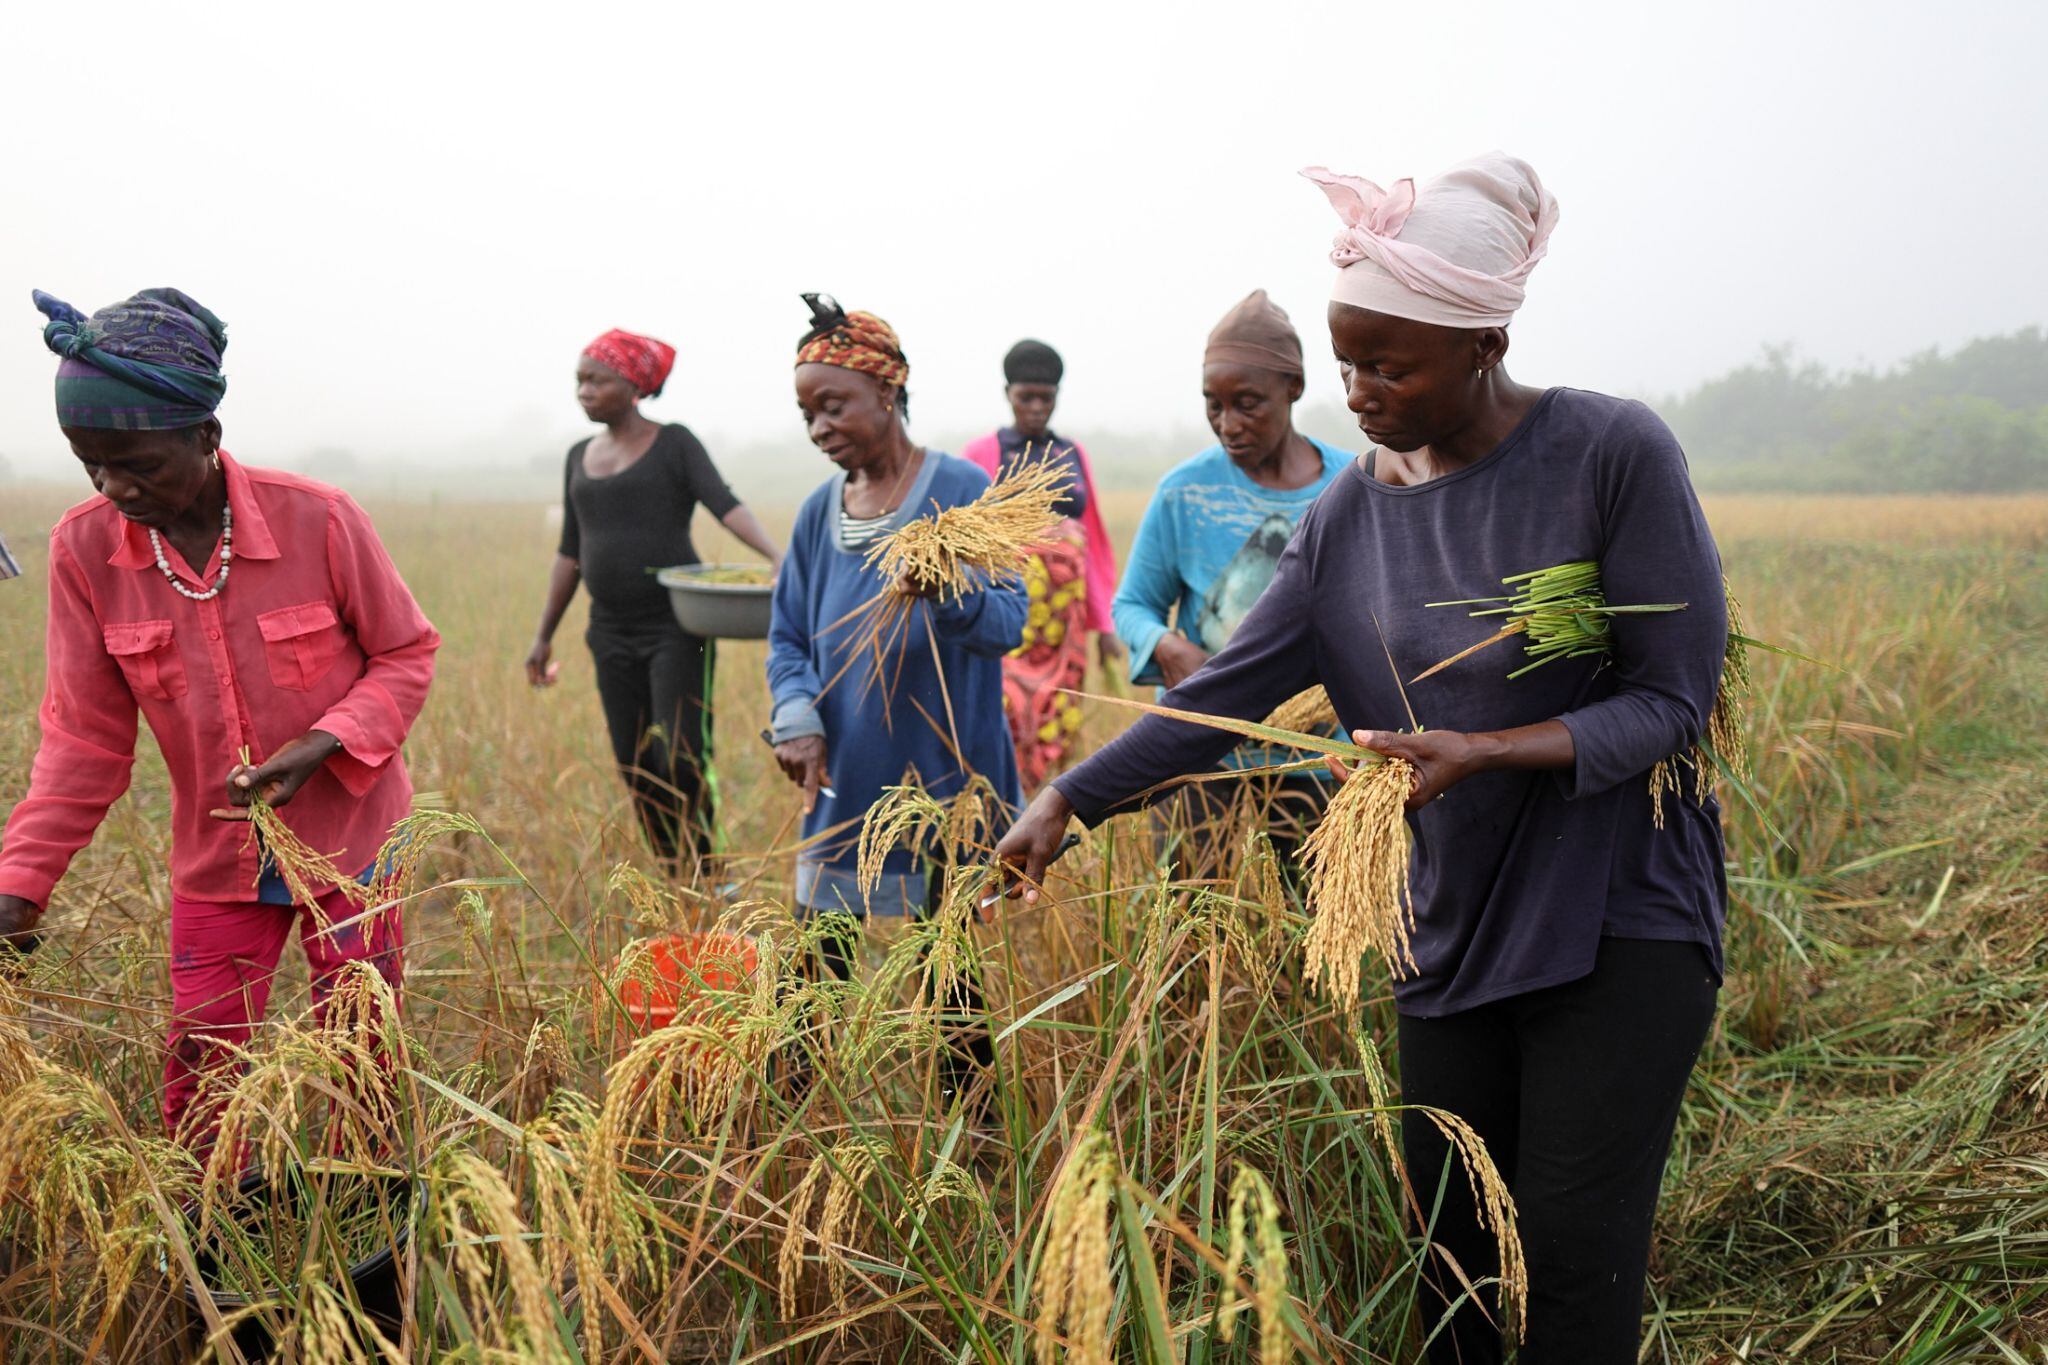 (The Church of Jesus Christ of Latter-day Saints) Farmers harvest rice in their fields at daybreak in Gbarnga, Liberia, on Friday, Jan. 20, 2024. They often sing as they harvest to demonstrate to unity and harmony within the community. The church reported giving $1.3 billion in charitable aid in 2023.